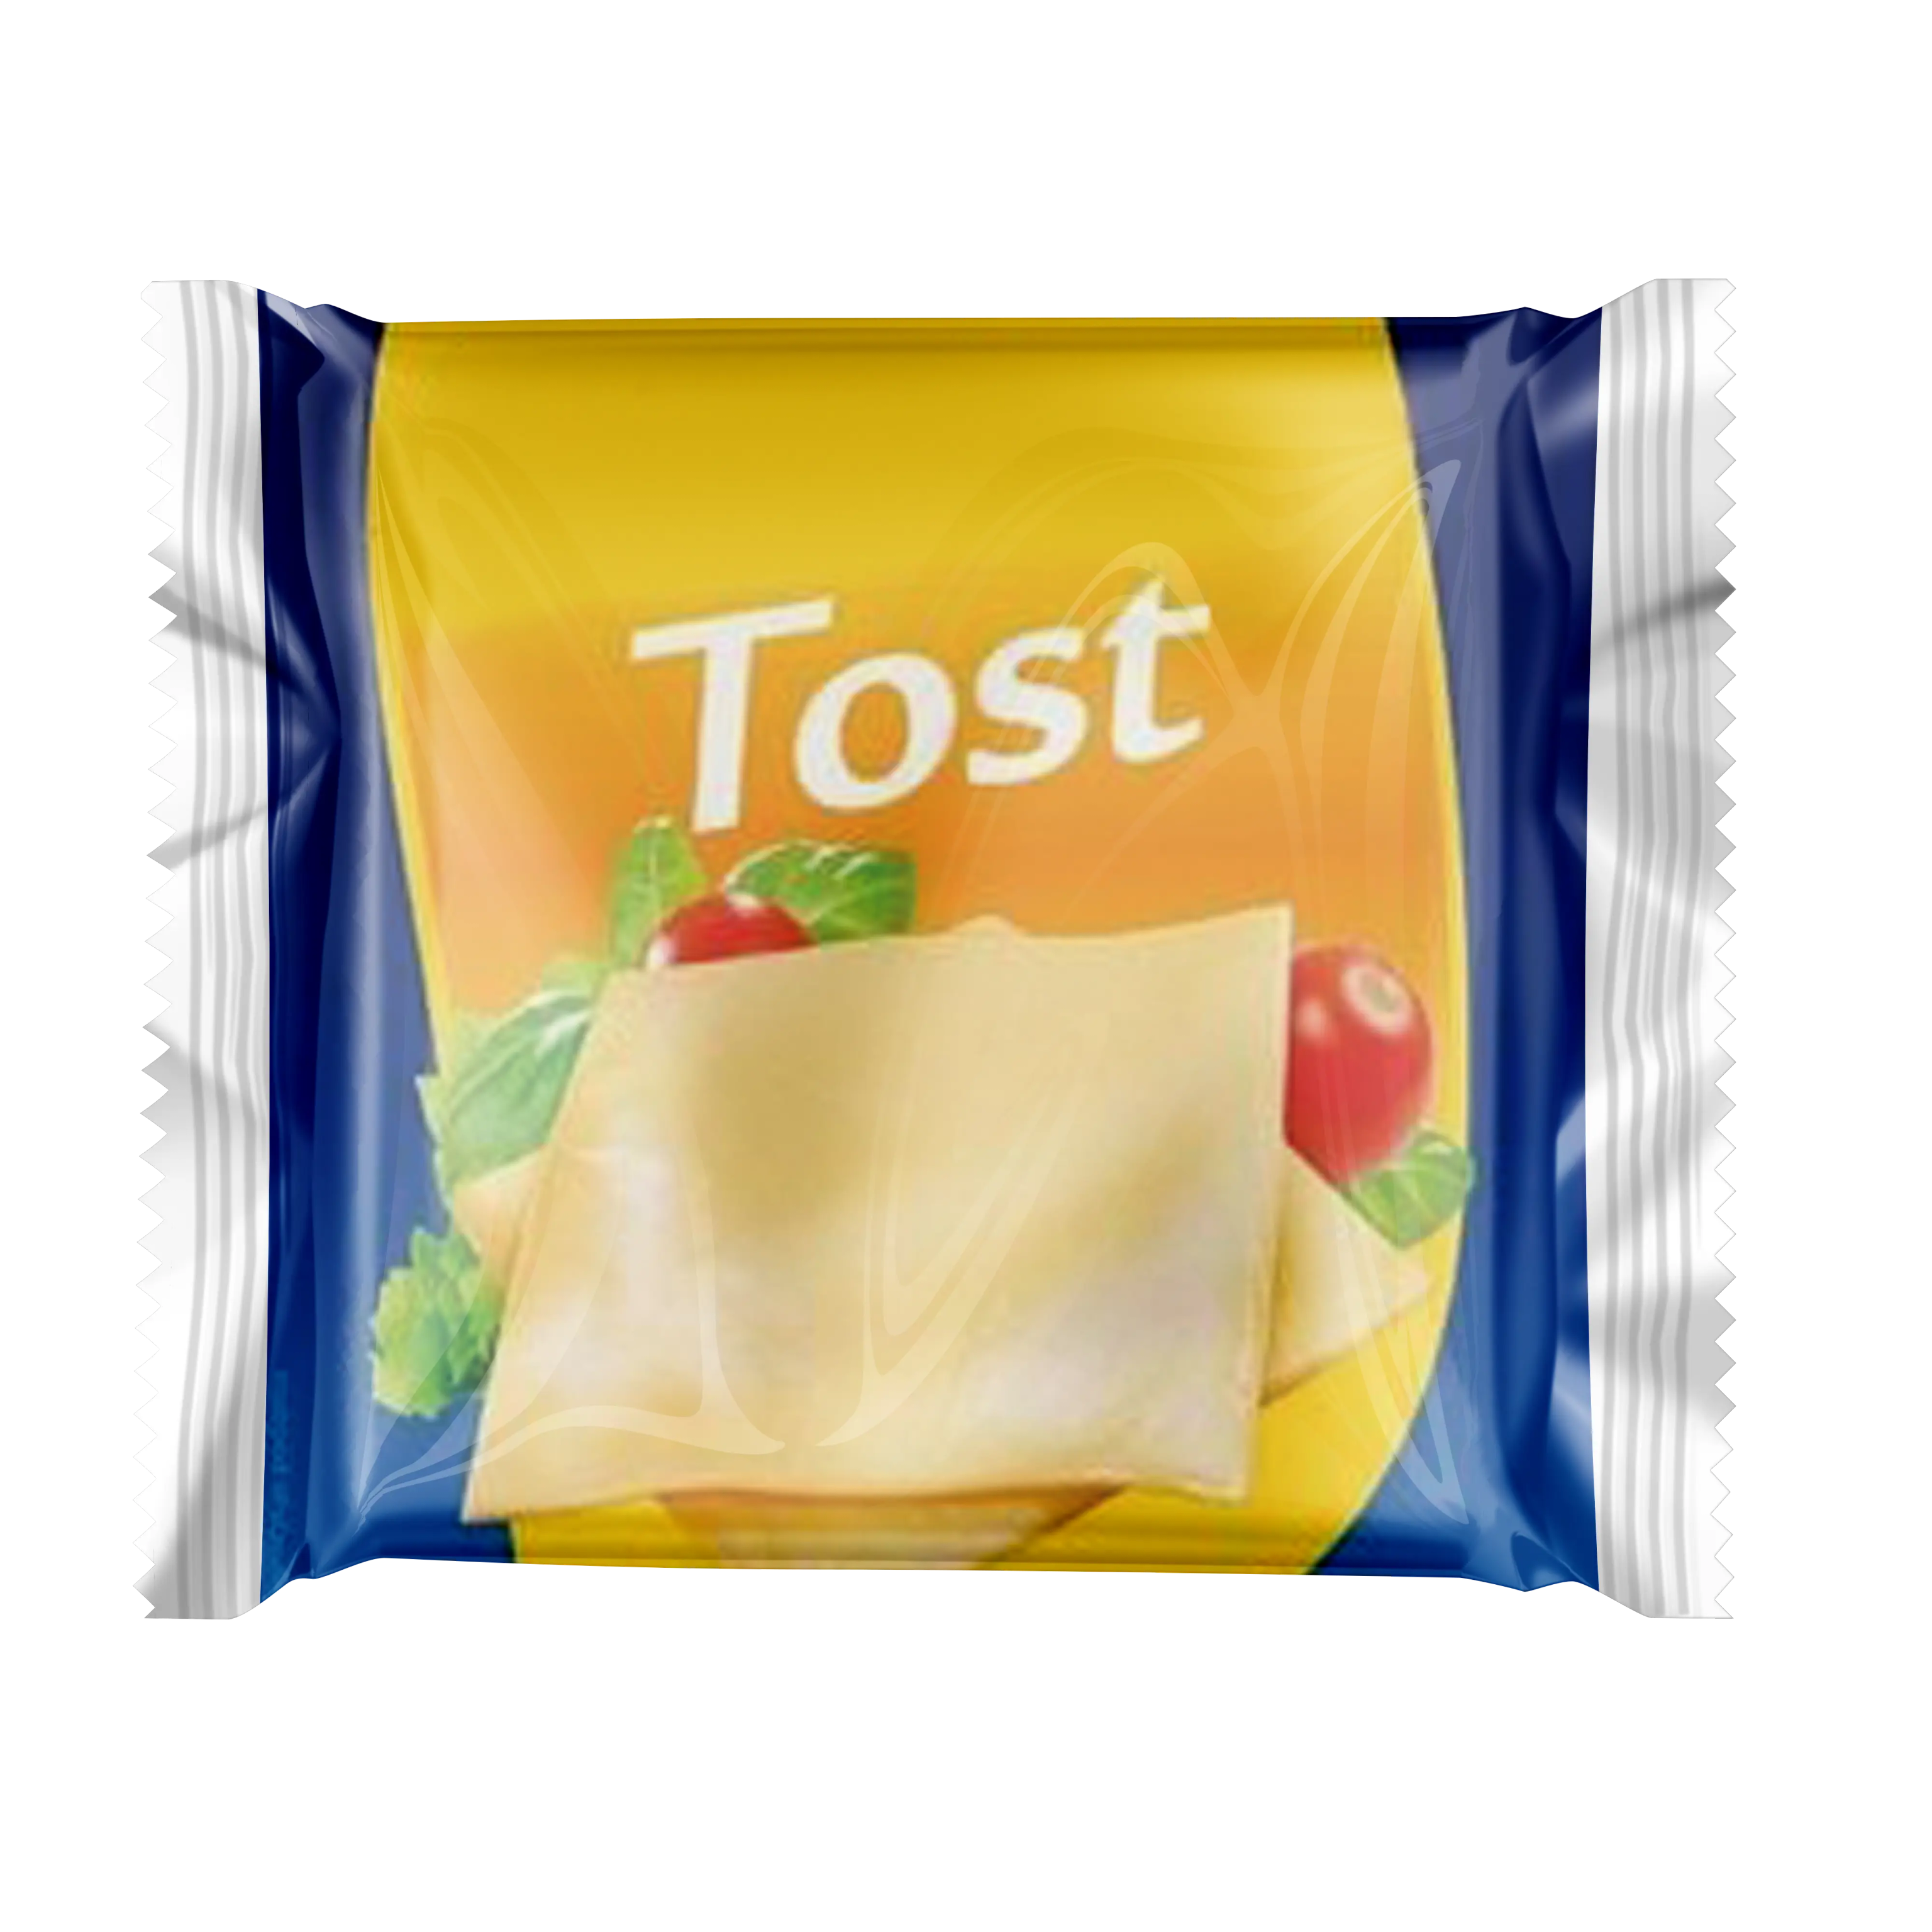 Tost